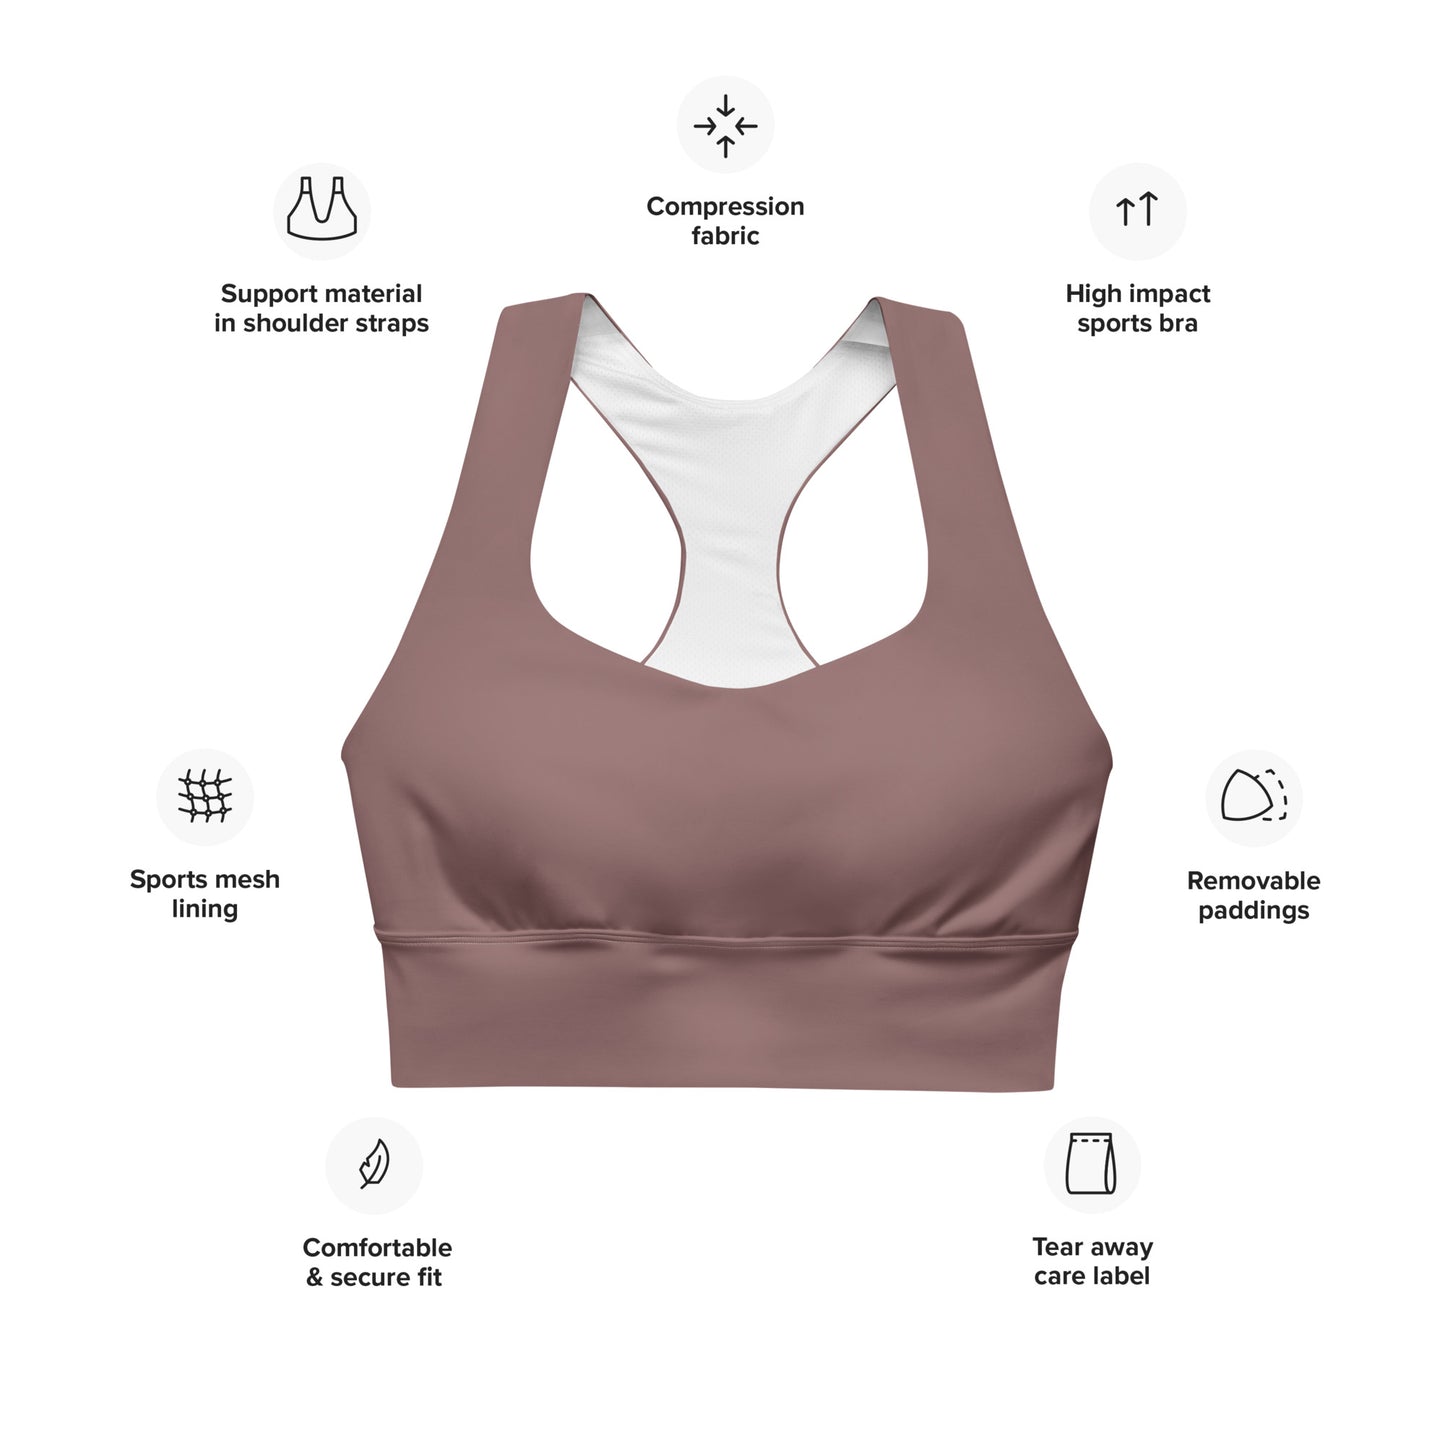 Muave Longline Camo UNCIVIL women's high impact Sports Bra with White spear. Product informational sheet.